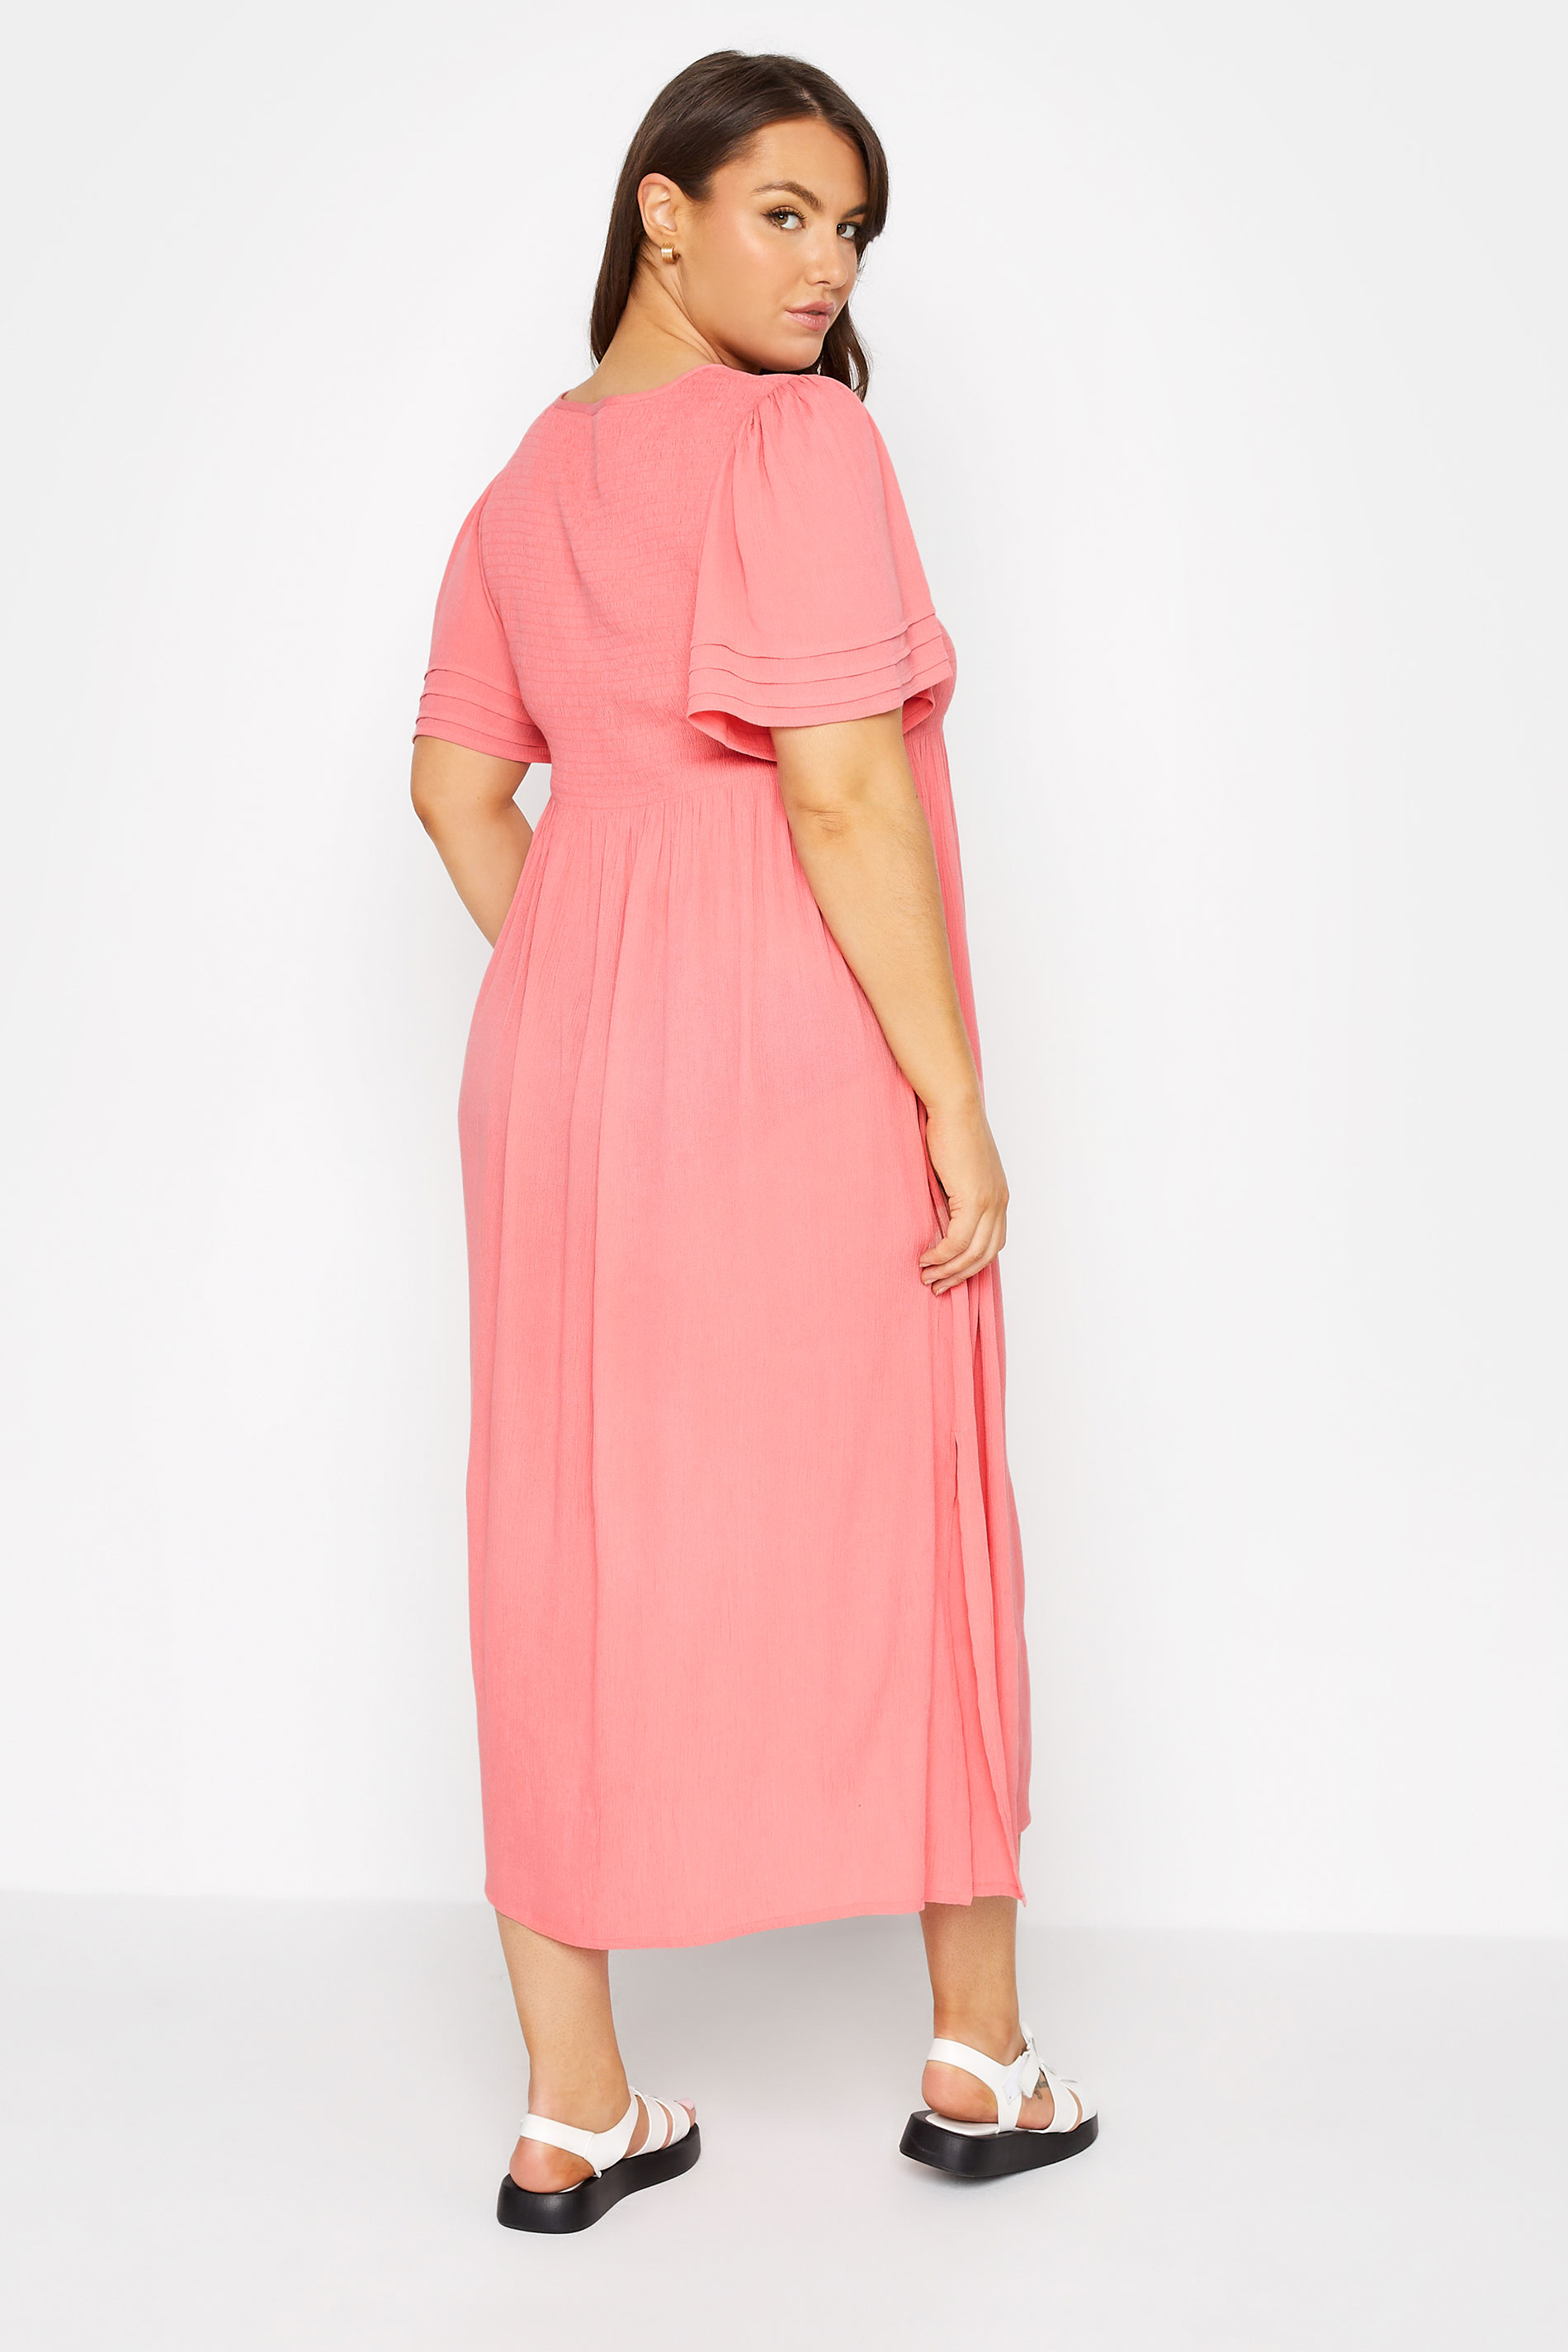 LIMITED COLLECTION Plus Size Coral Pink Crinkle Angel Sleeve Dress | Yours Clothing  3